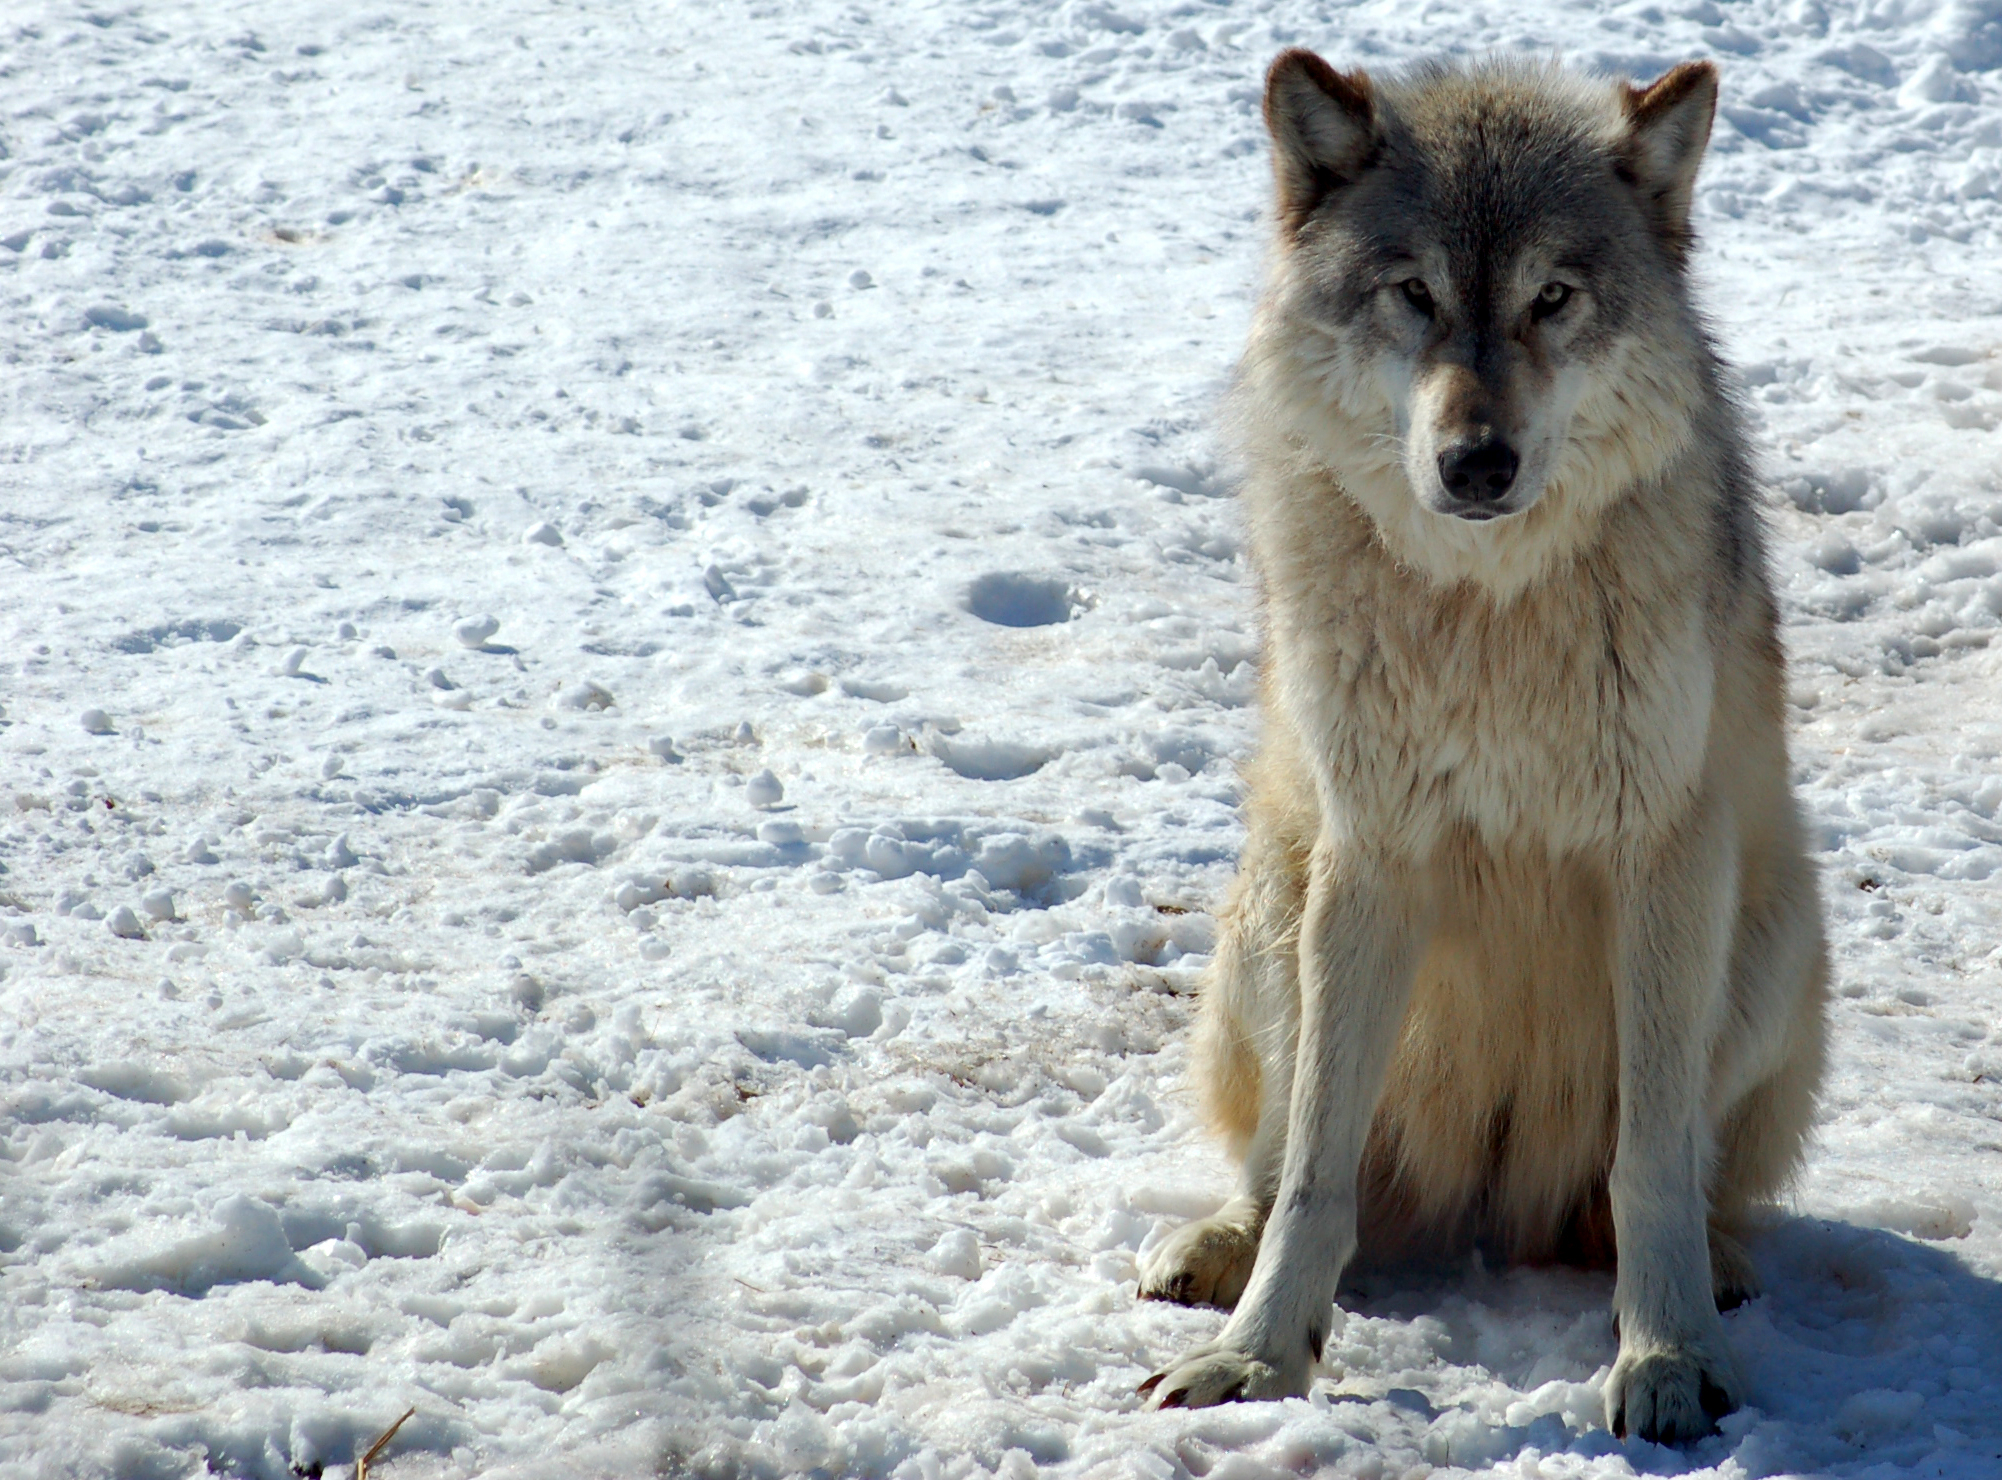 Gray wolf. Photo by Derek Bakken / CC BY (https://creativecommons.org/licenses/by/2.0)